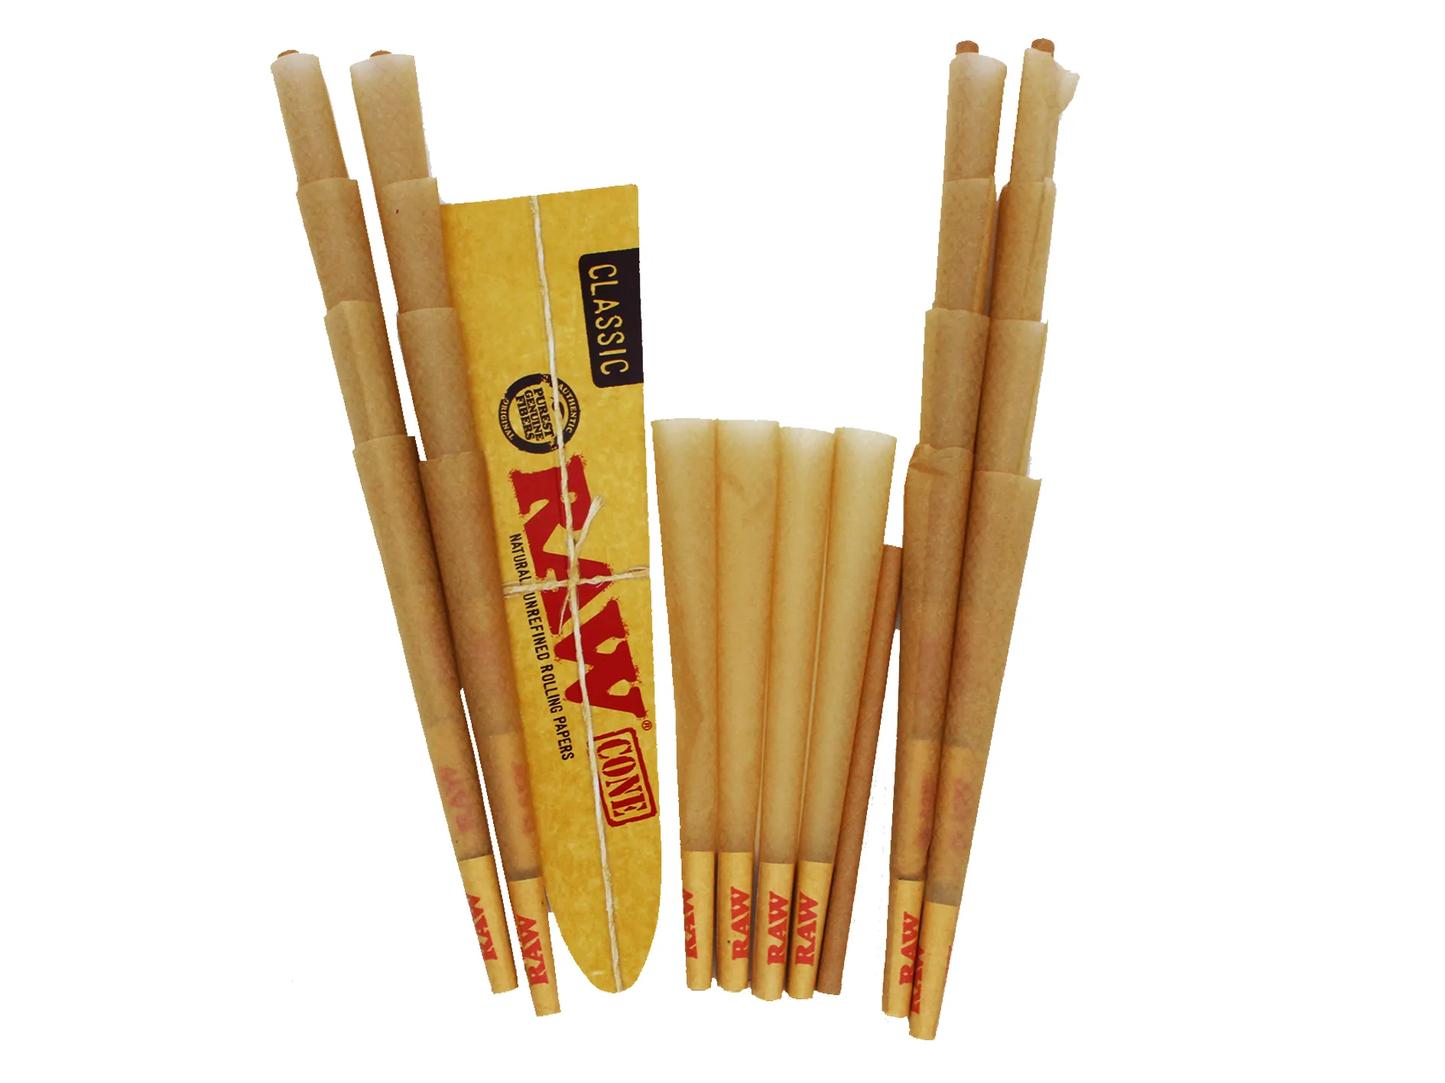 RAW - 'Classic', Kingsize Cones & Filling Funnel